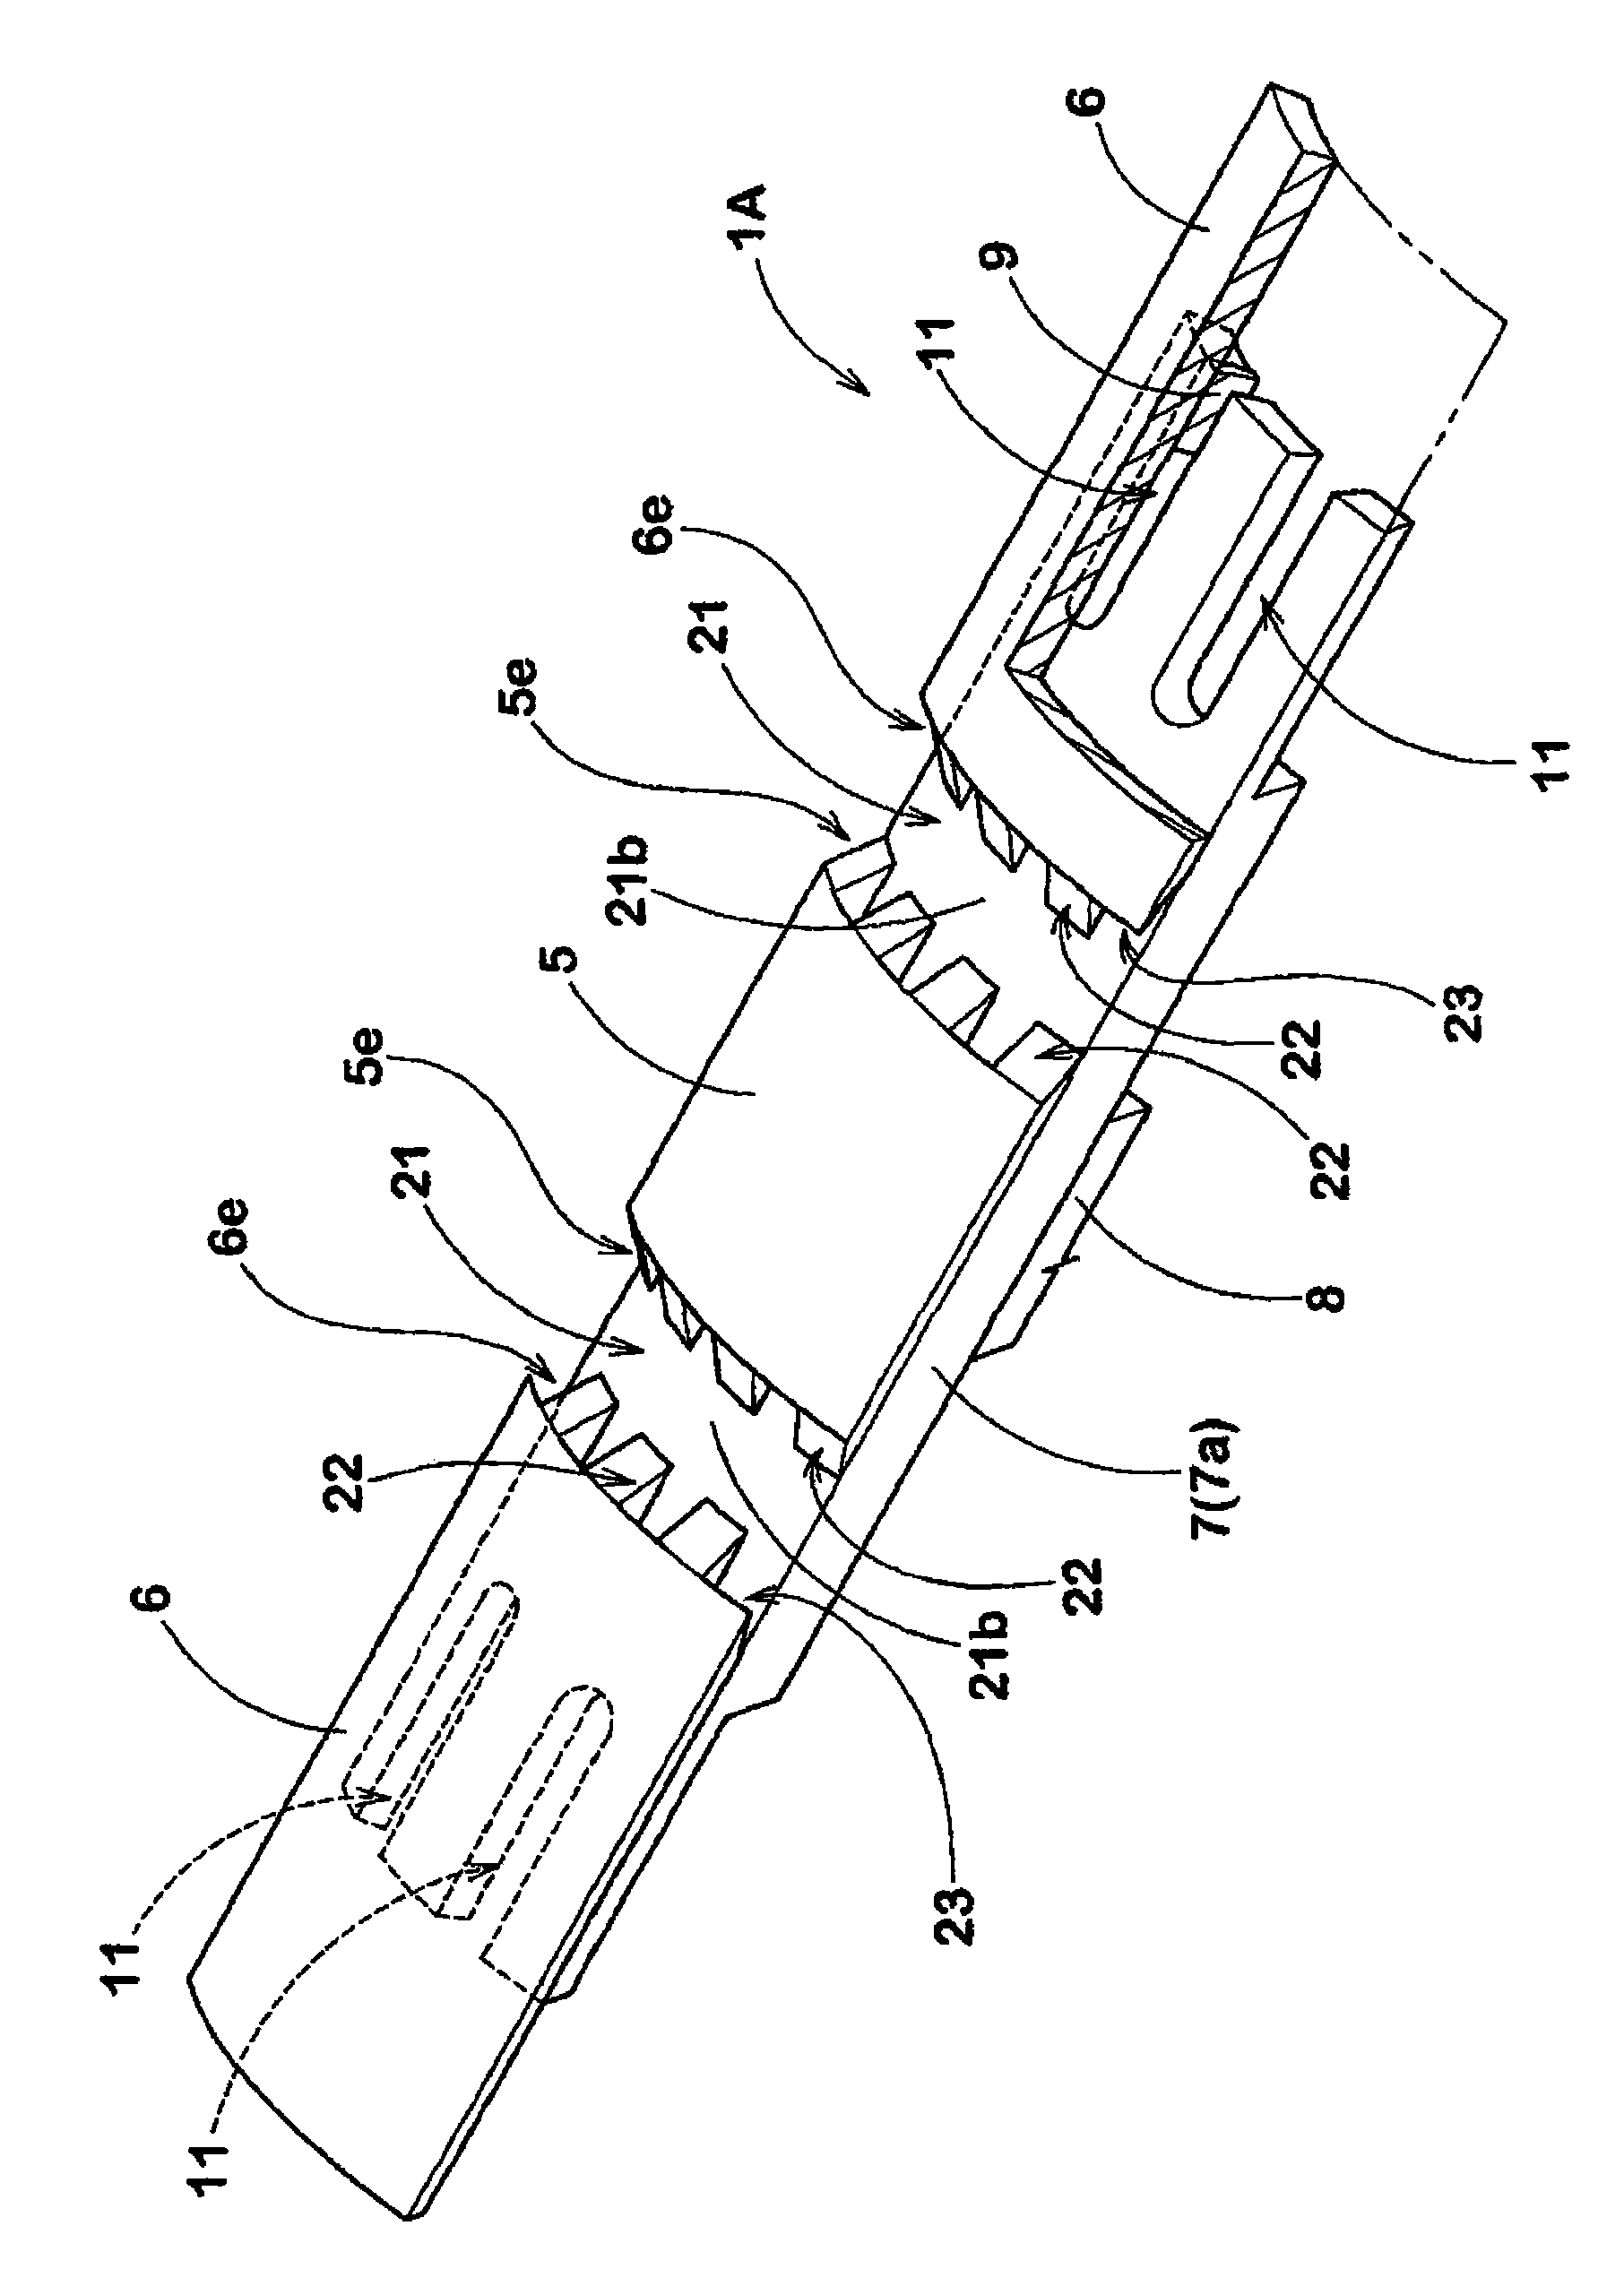 Method for making run-flat tire and assembly drum device for same